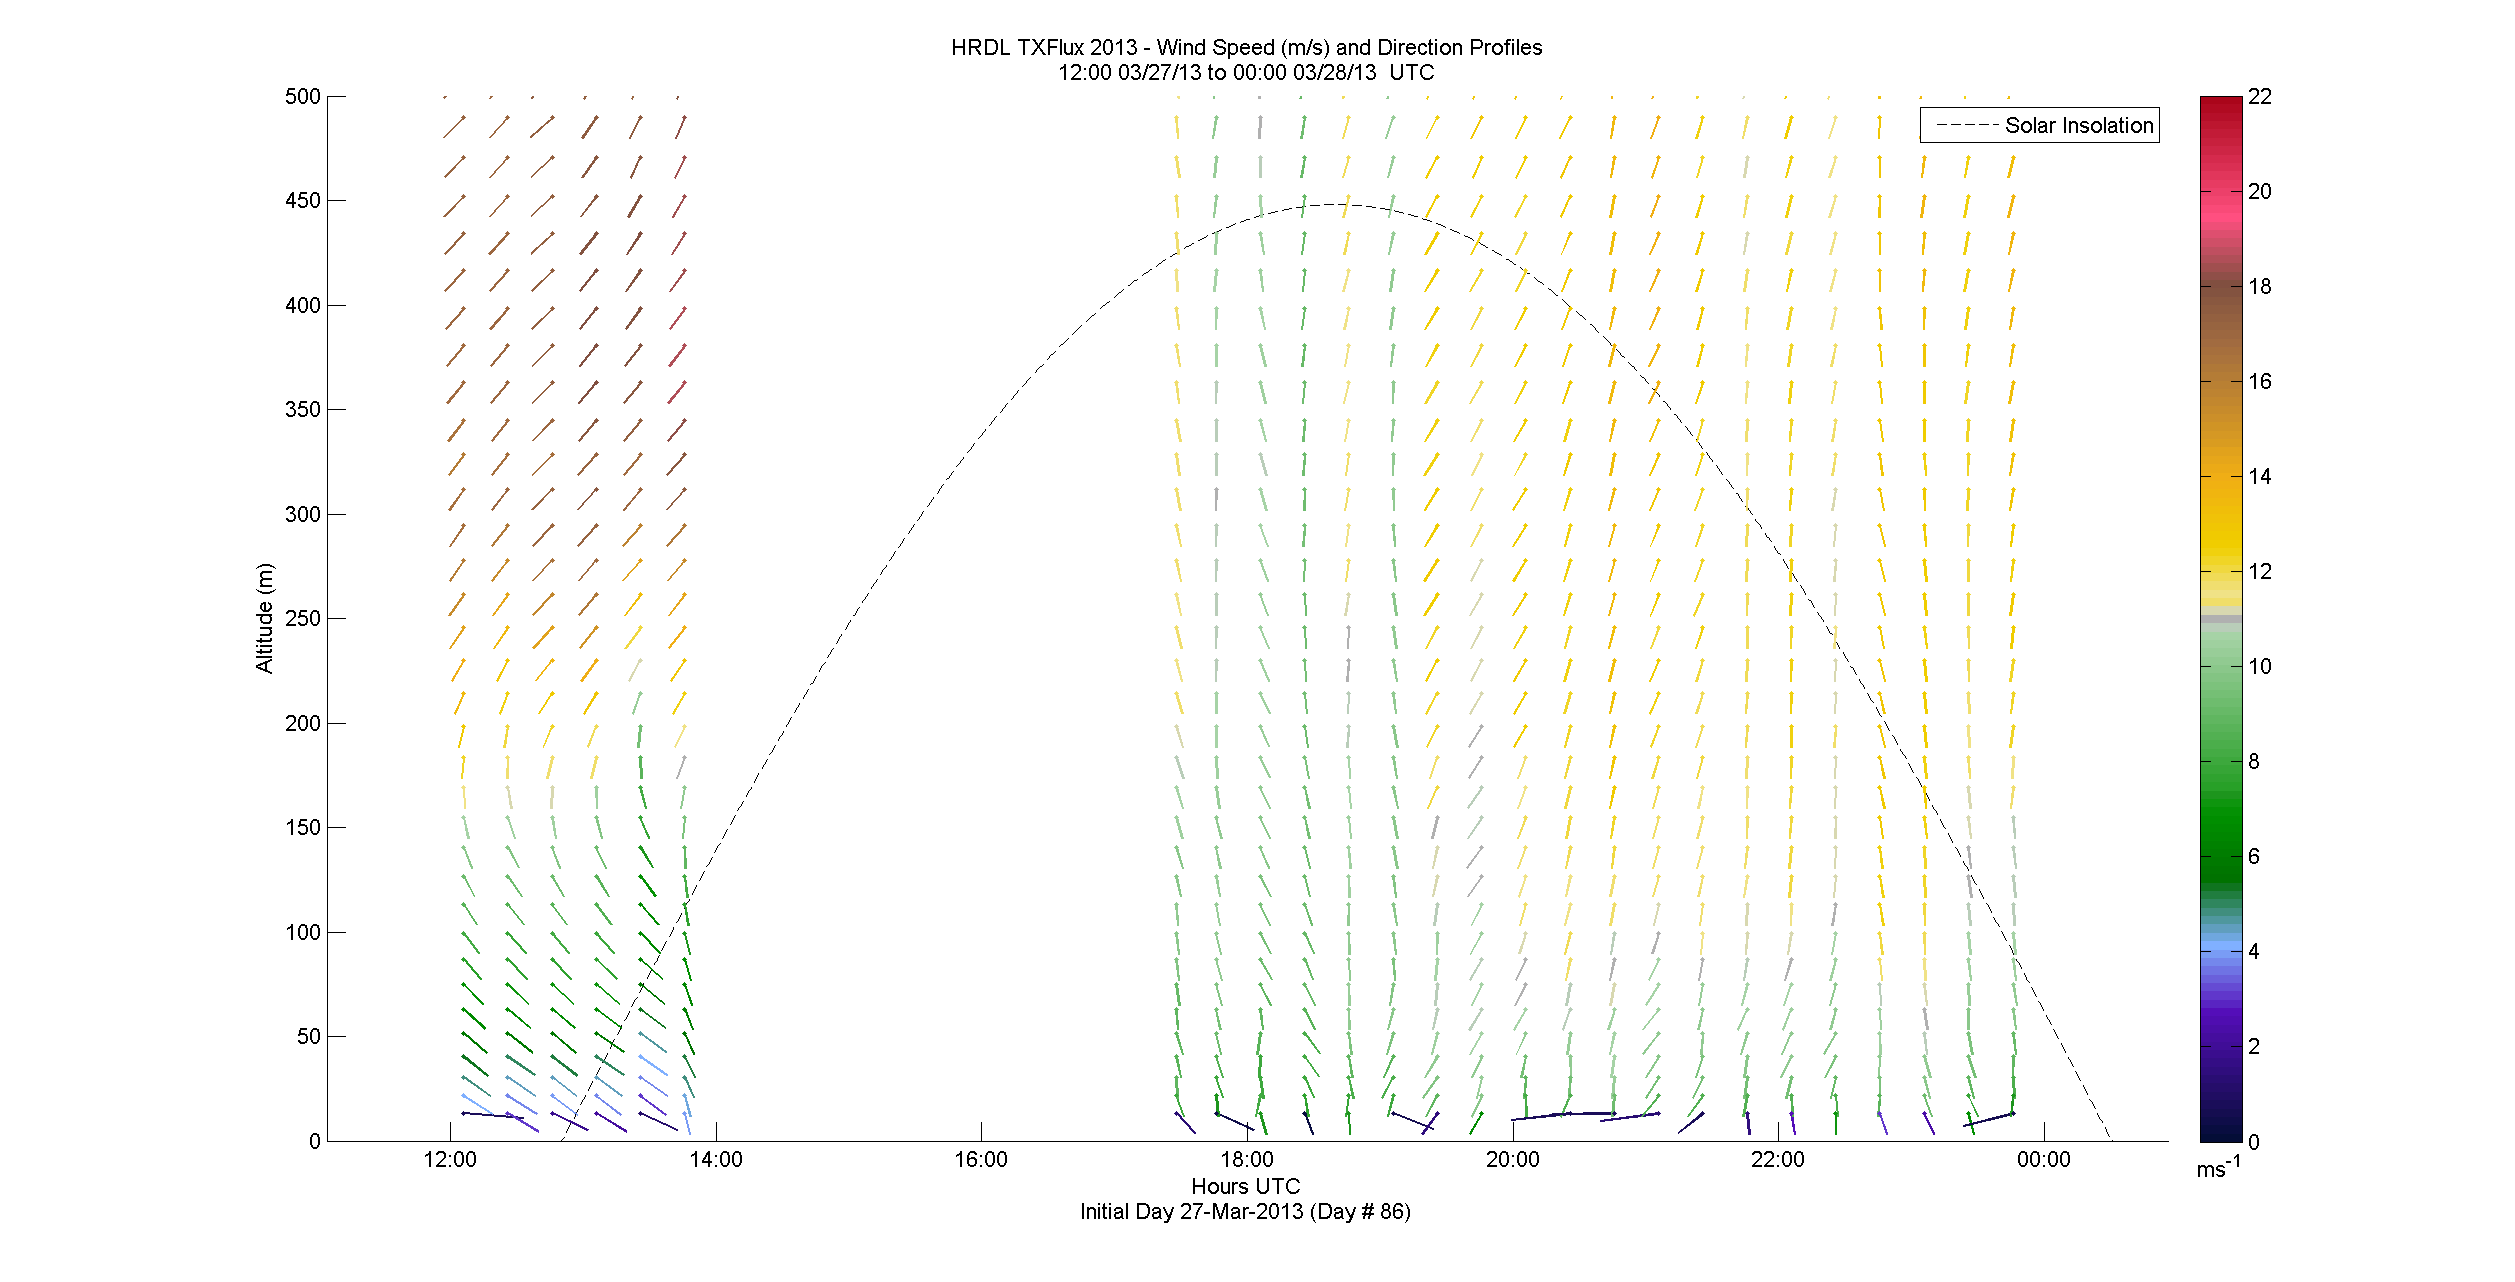 HRDL speed and direction profile - March 27 pm